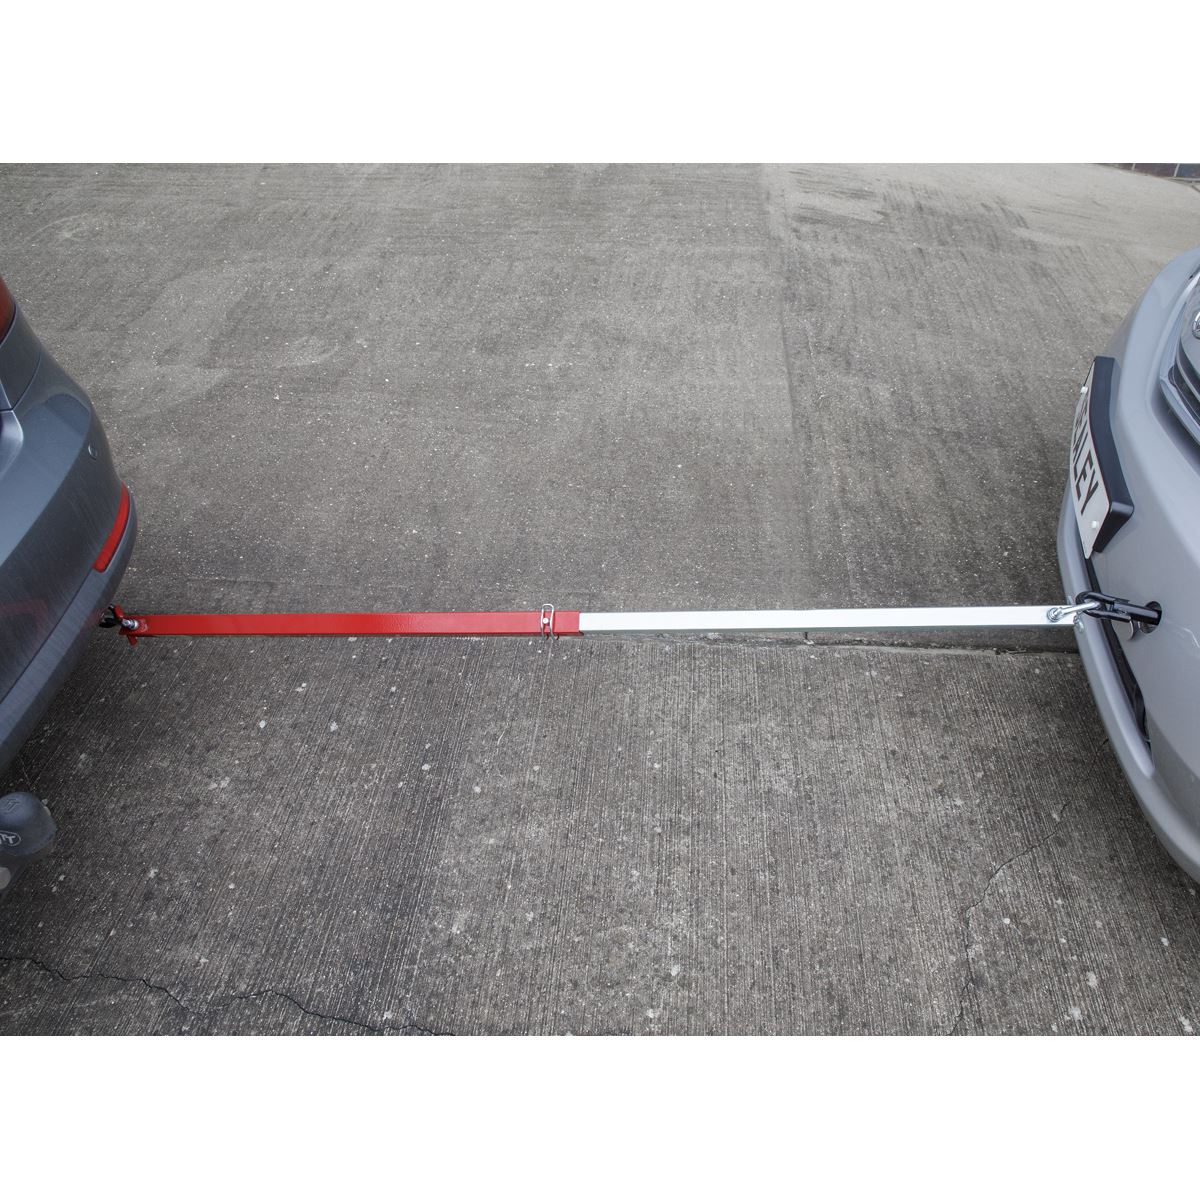 Sealey Tow Pole 2500kg Rolling Load Capacity